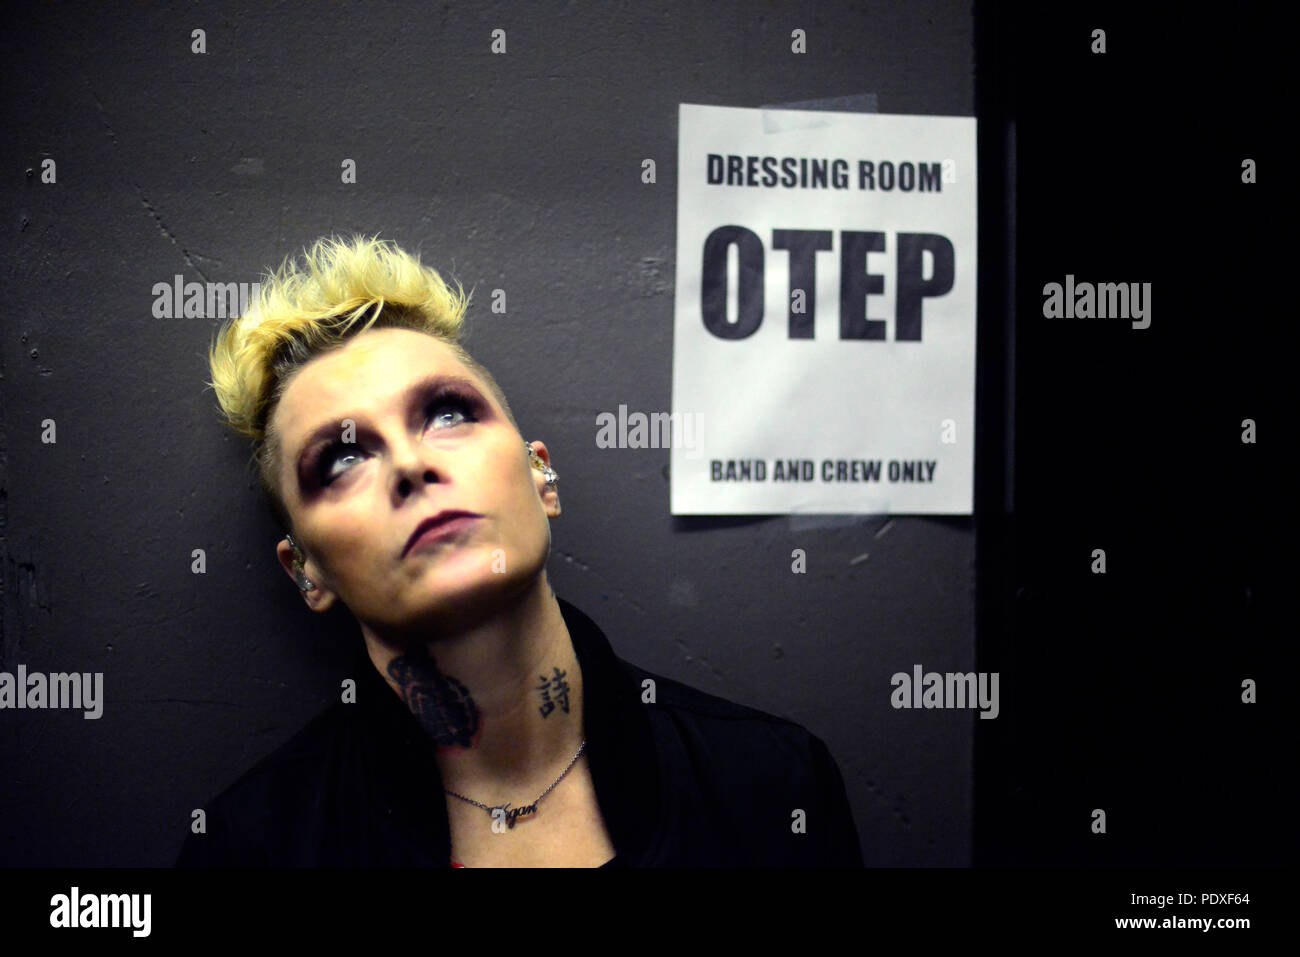 West Hollywood, CA, USA. 8th Aug, 2018. Musician - OTEP SHAMAYA lead vocals for OTEP back stage at The Whisky A Go Go, West Hollywood, California, USA, August 8, 2018. OTEP is a Los Angeles based heavy metal band that integrates rap metal, new metal, alternative metal into their sound. OTEP is an anagram for poet. Otep Shamaya descibes the bands sound as, ''art house nu-metal.'' .Image Credit cr Scott Mitchell/ZUMA Press Credit: Scott Mitchell/ZUMA Wire/Alamy Live News Stock Photo